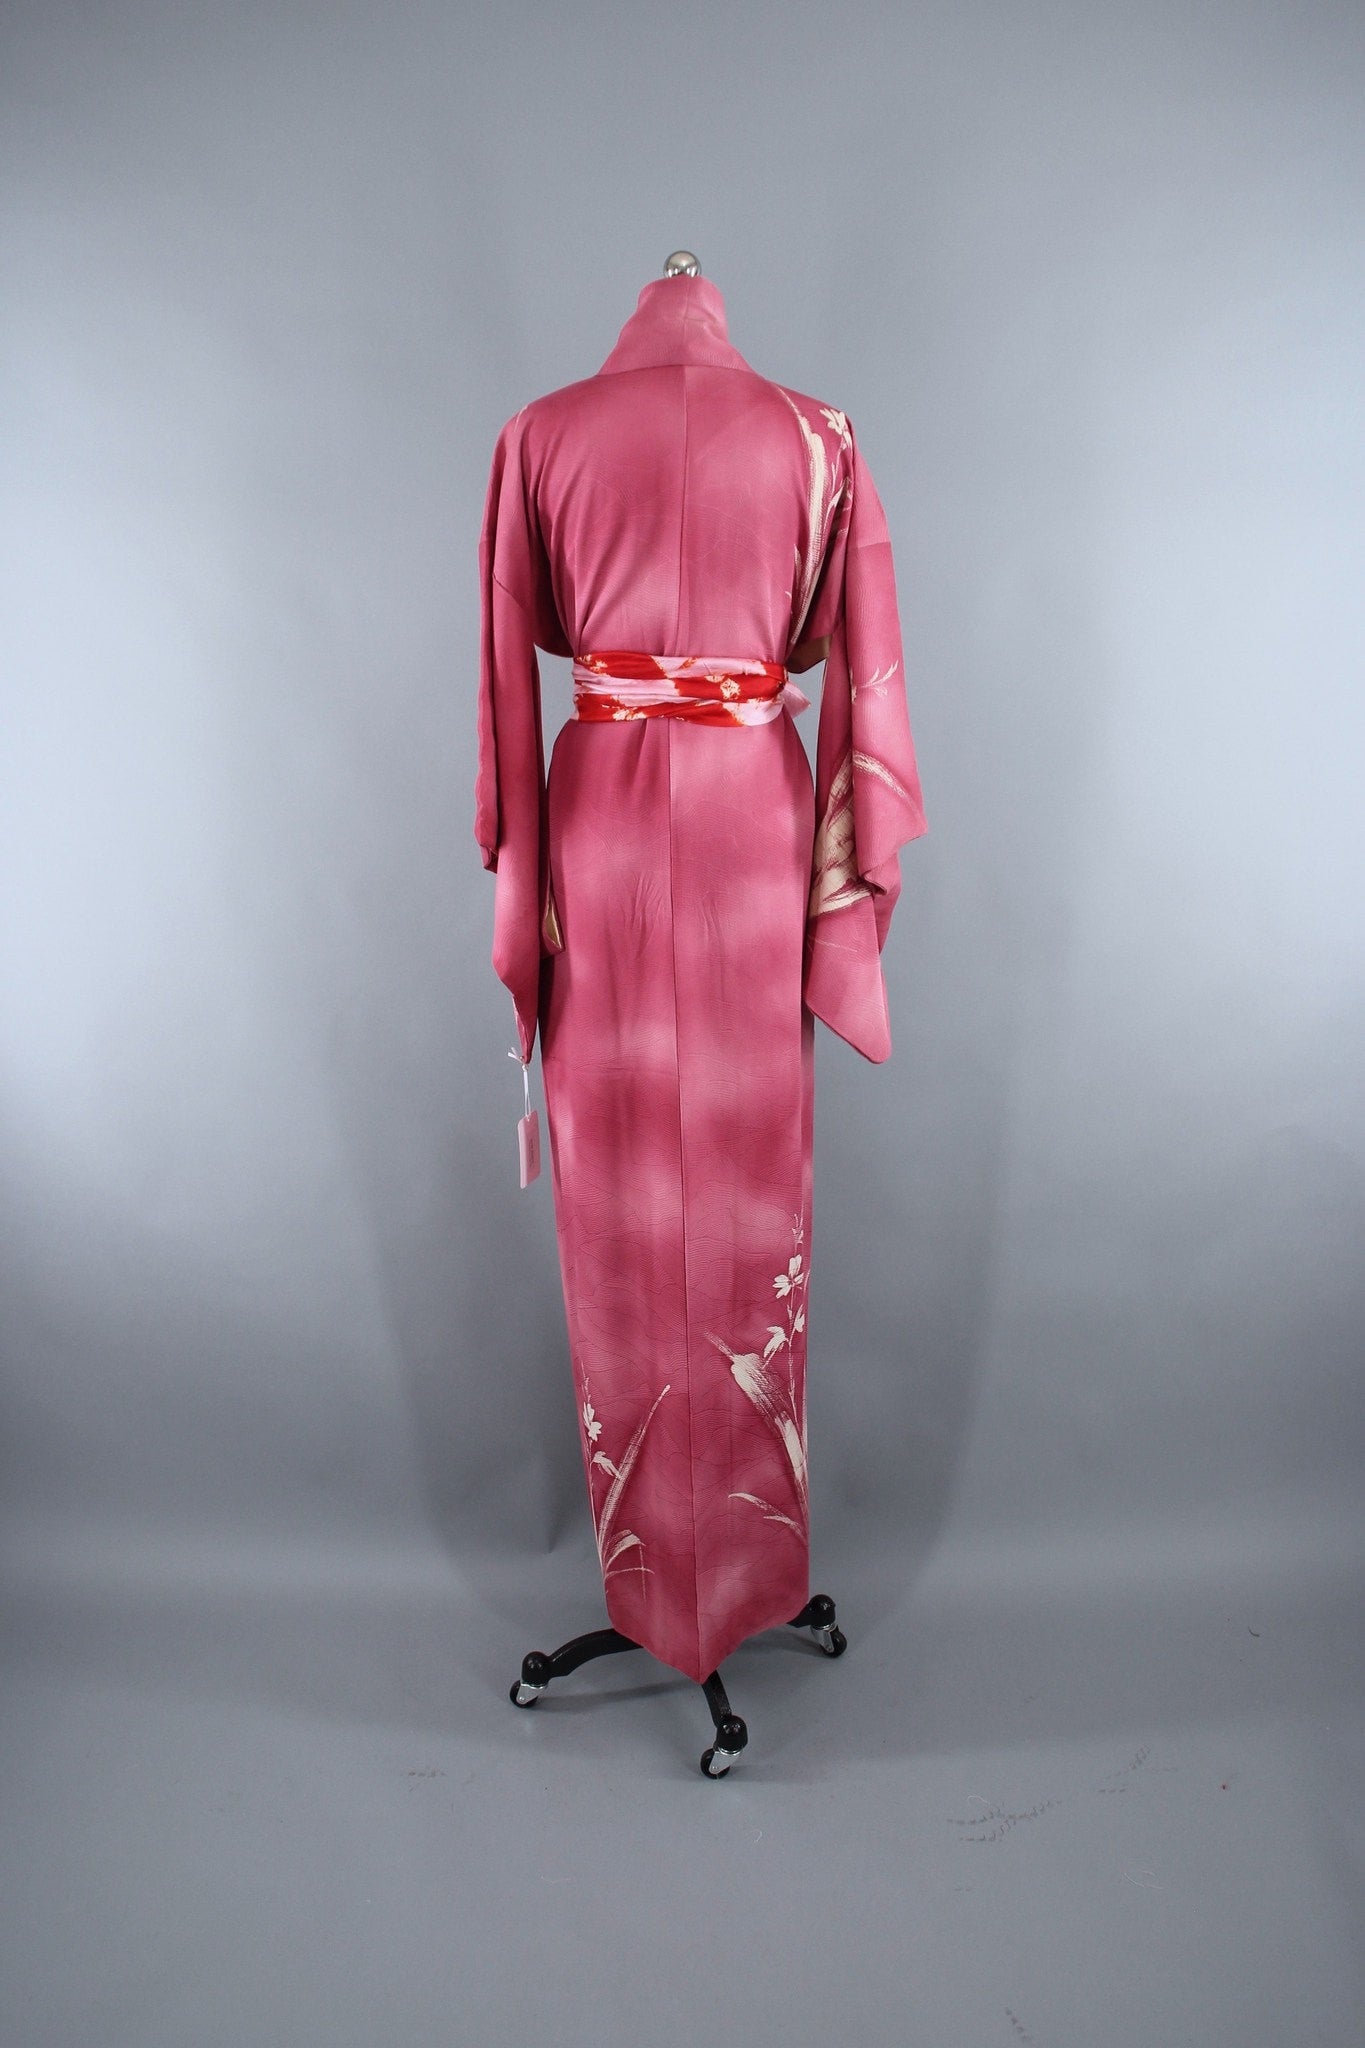 1950s Vintage Silk Kimono Robe with Mauve Pink Ombre Floral Pattern - ThisBlueBird